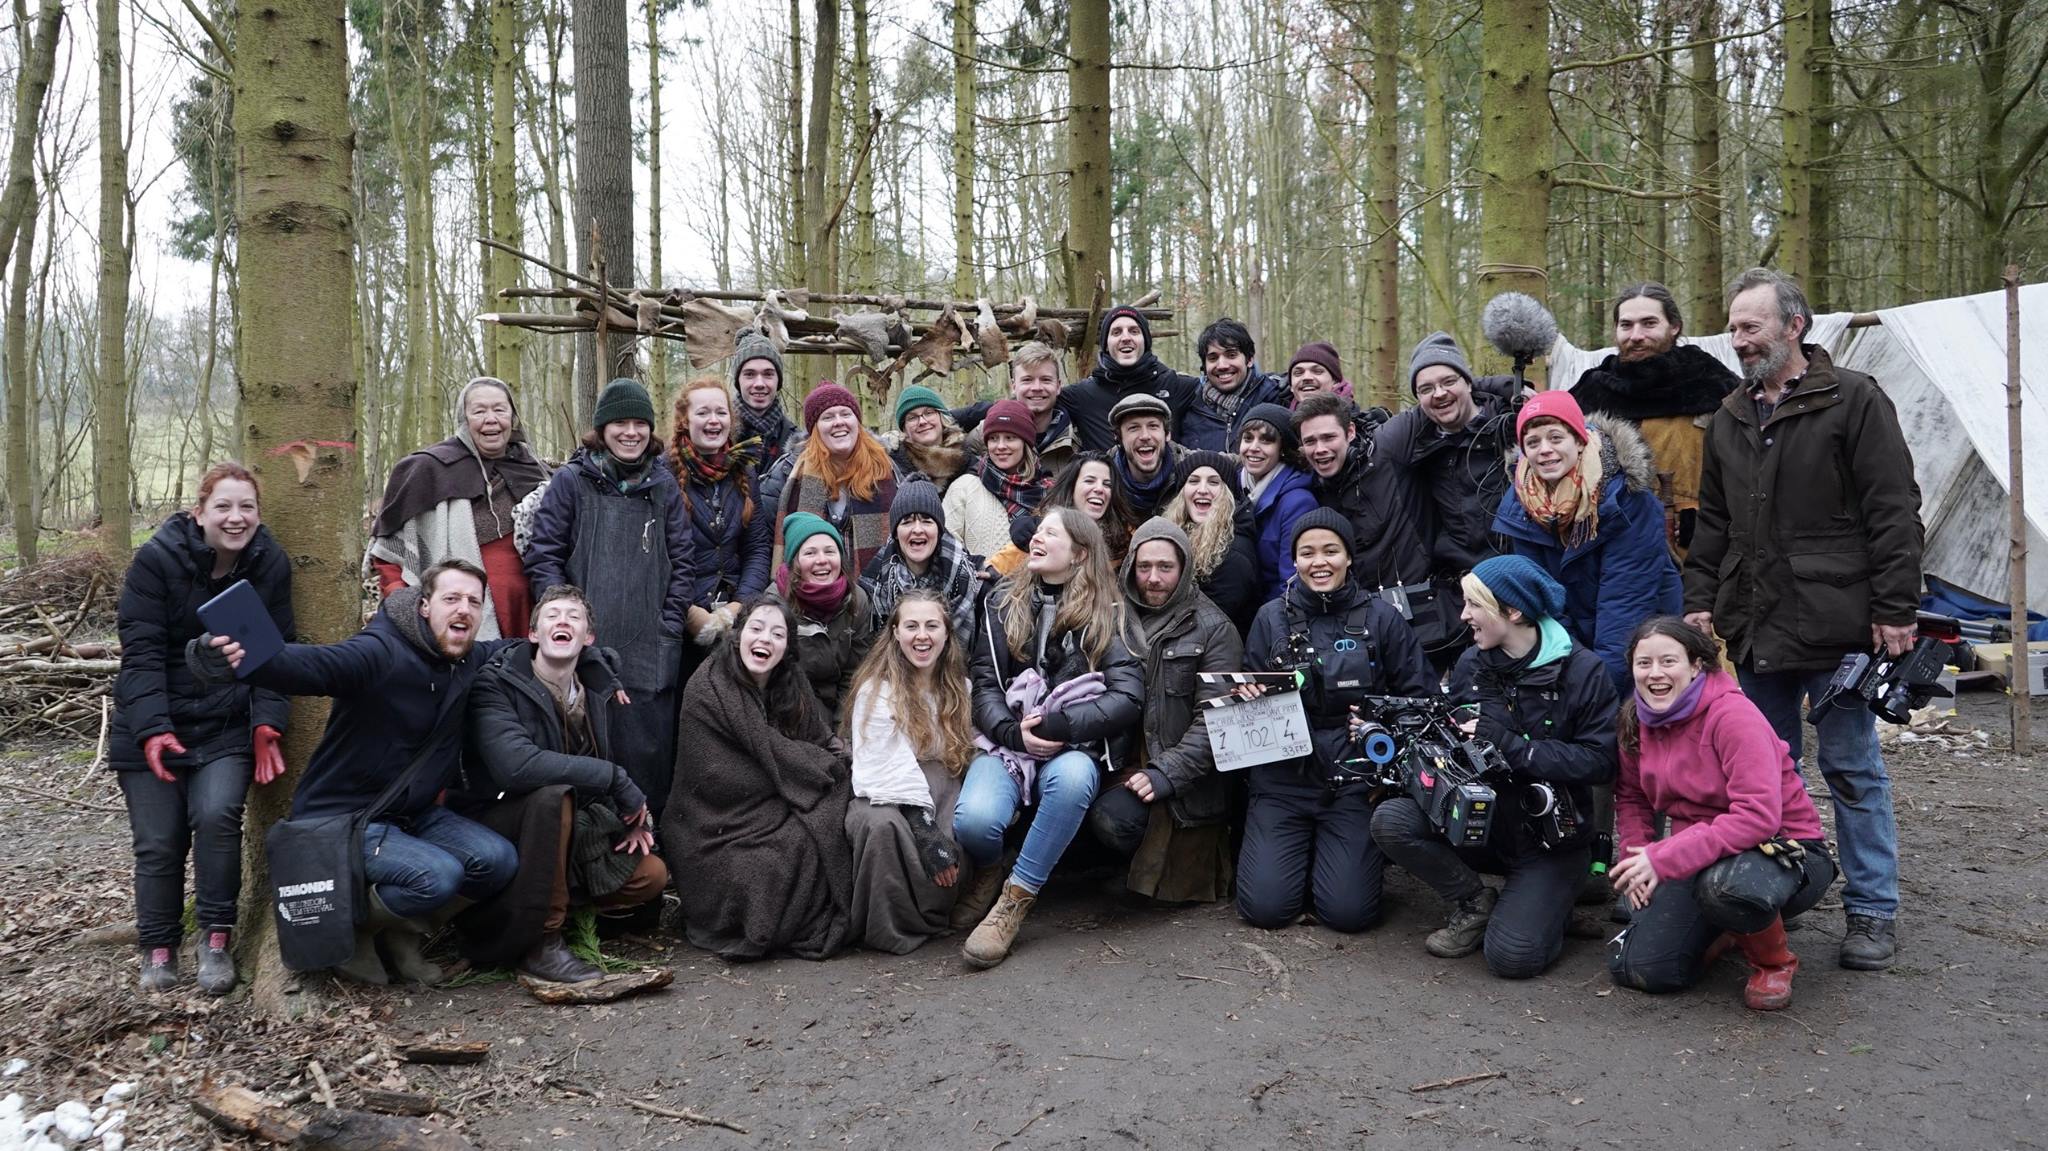 The Wyrd cast and crew